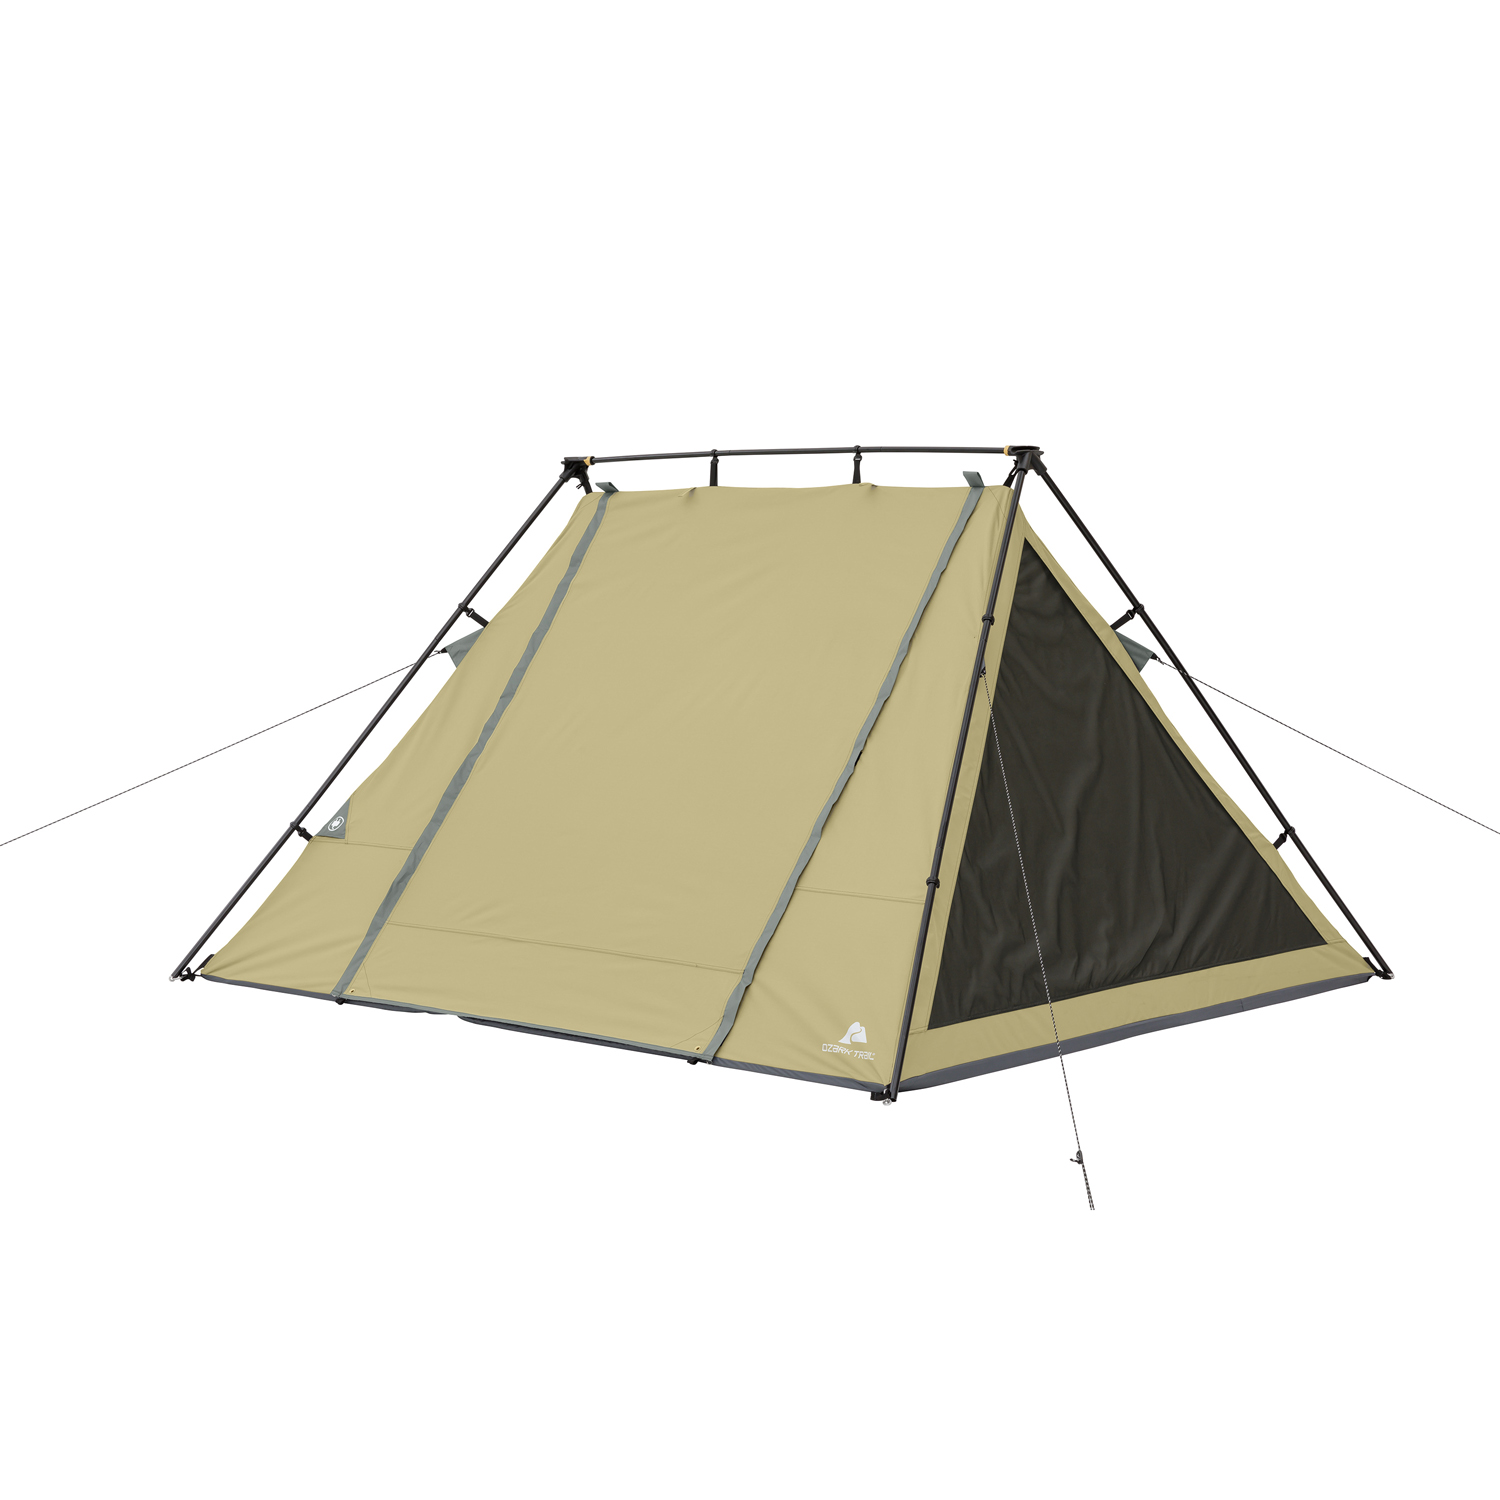 Ozark Trail 8’ x 7’ 4-Person A-Frame Tent with Awning - image 2 of 6